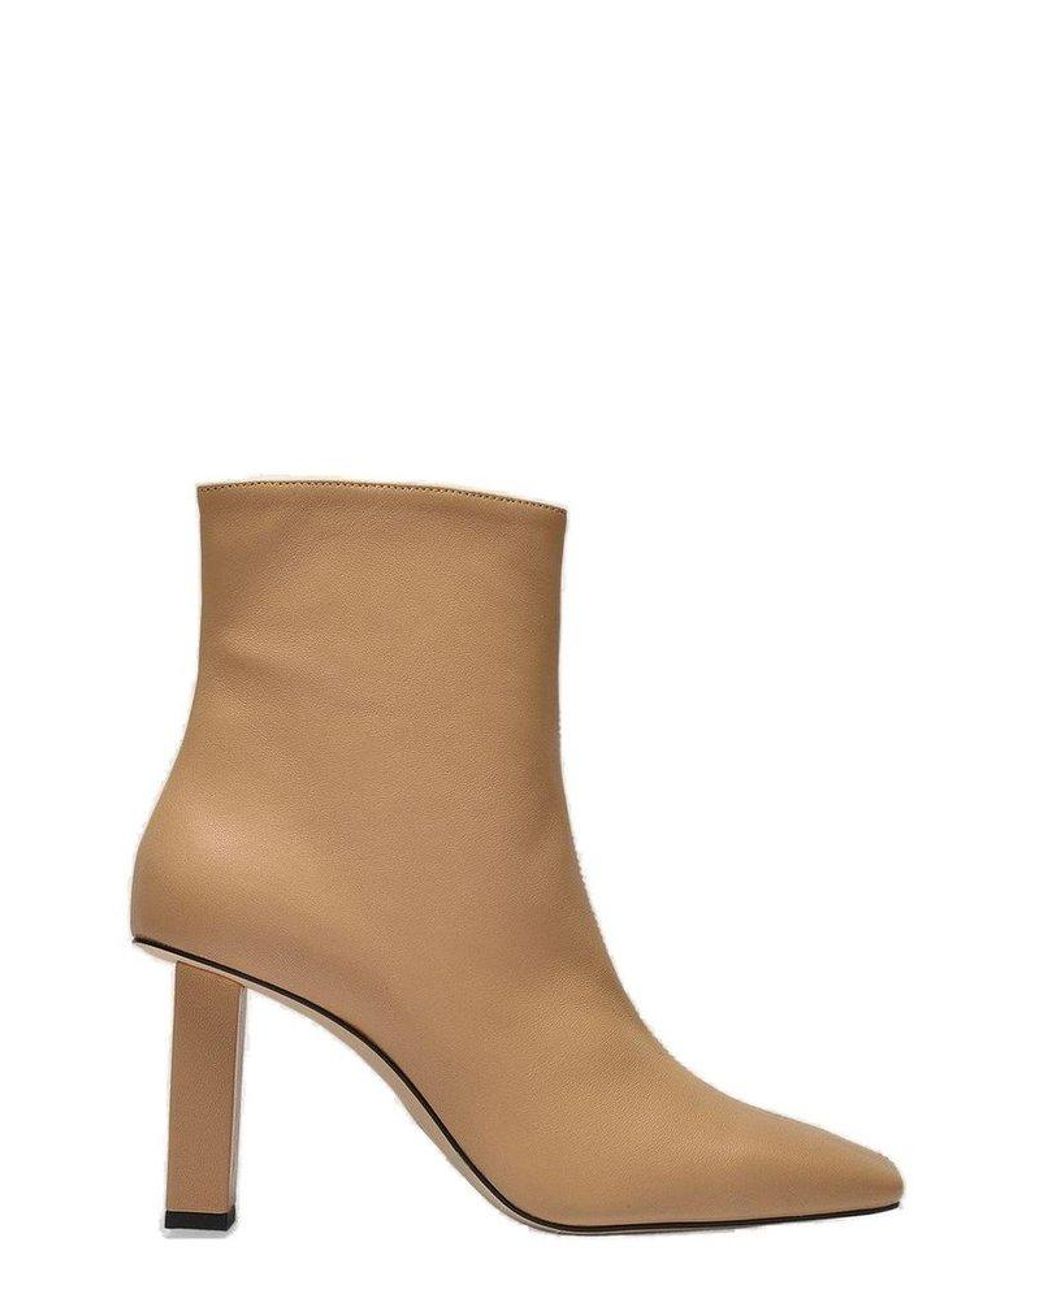 Anny Nord Joan Le Carre Ankle Boots in Brown | Lyst